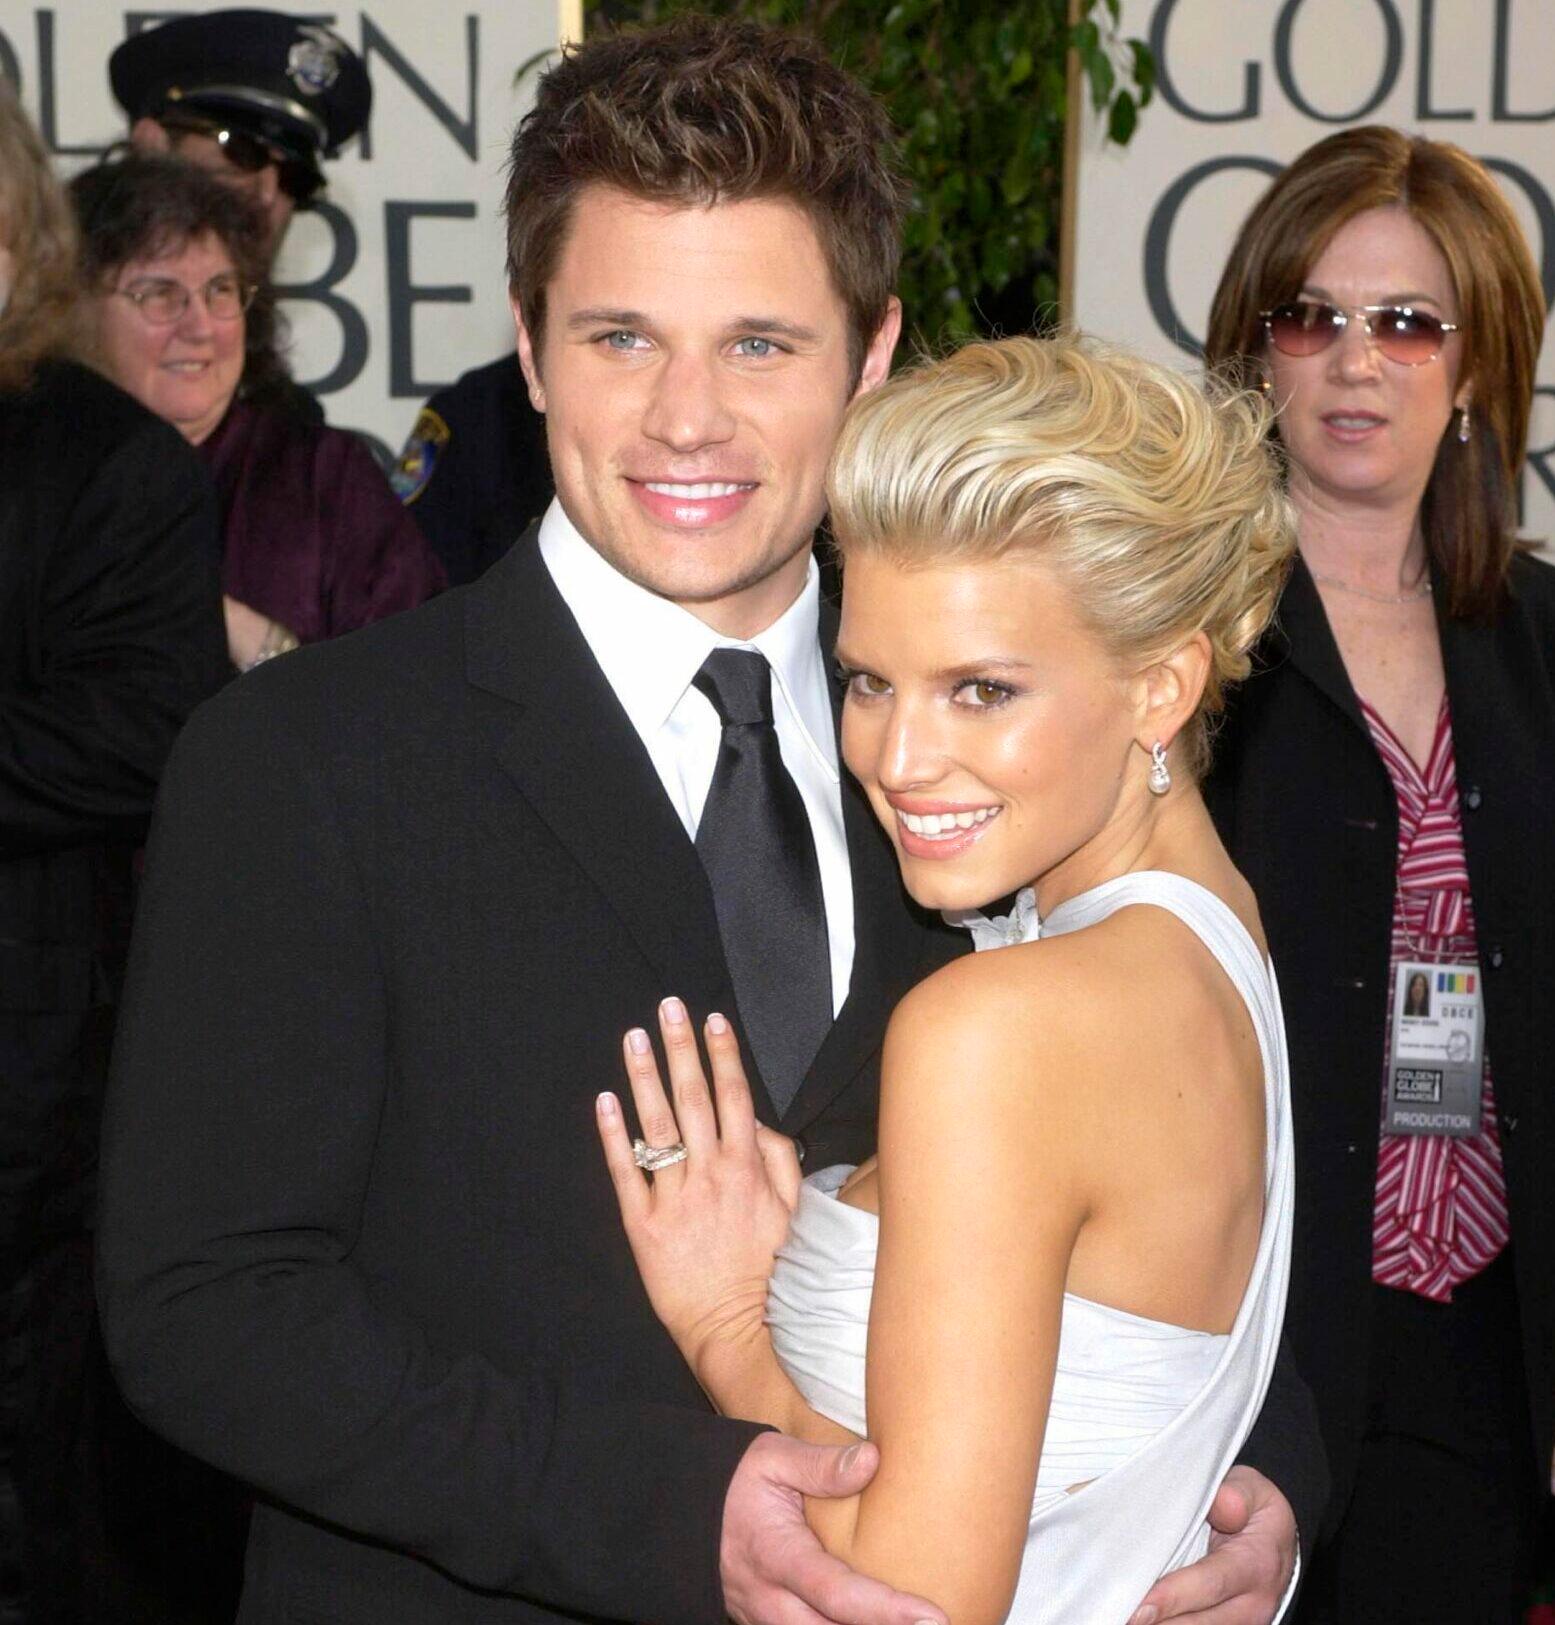 Nick Lachey and Jessica Simpson at the 61ST ANNUAL GOLDEN GLOBE AWARDS.